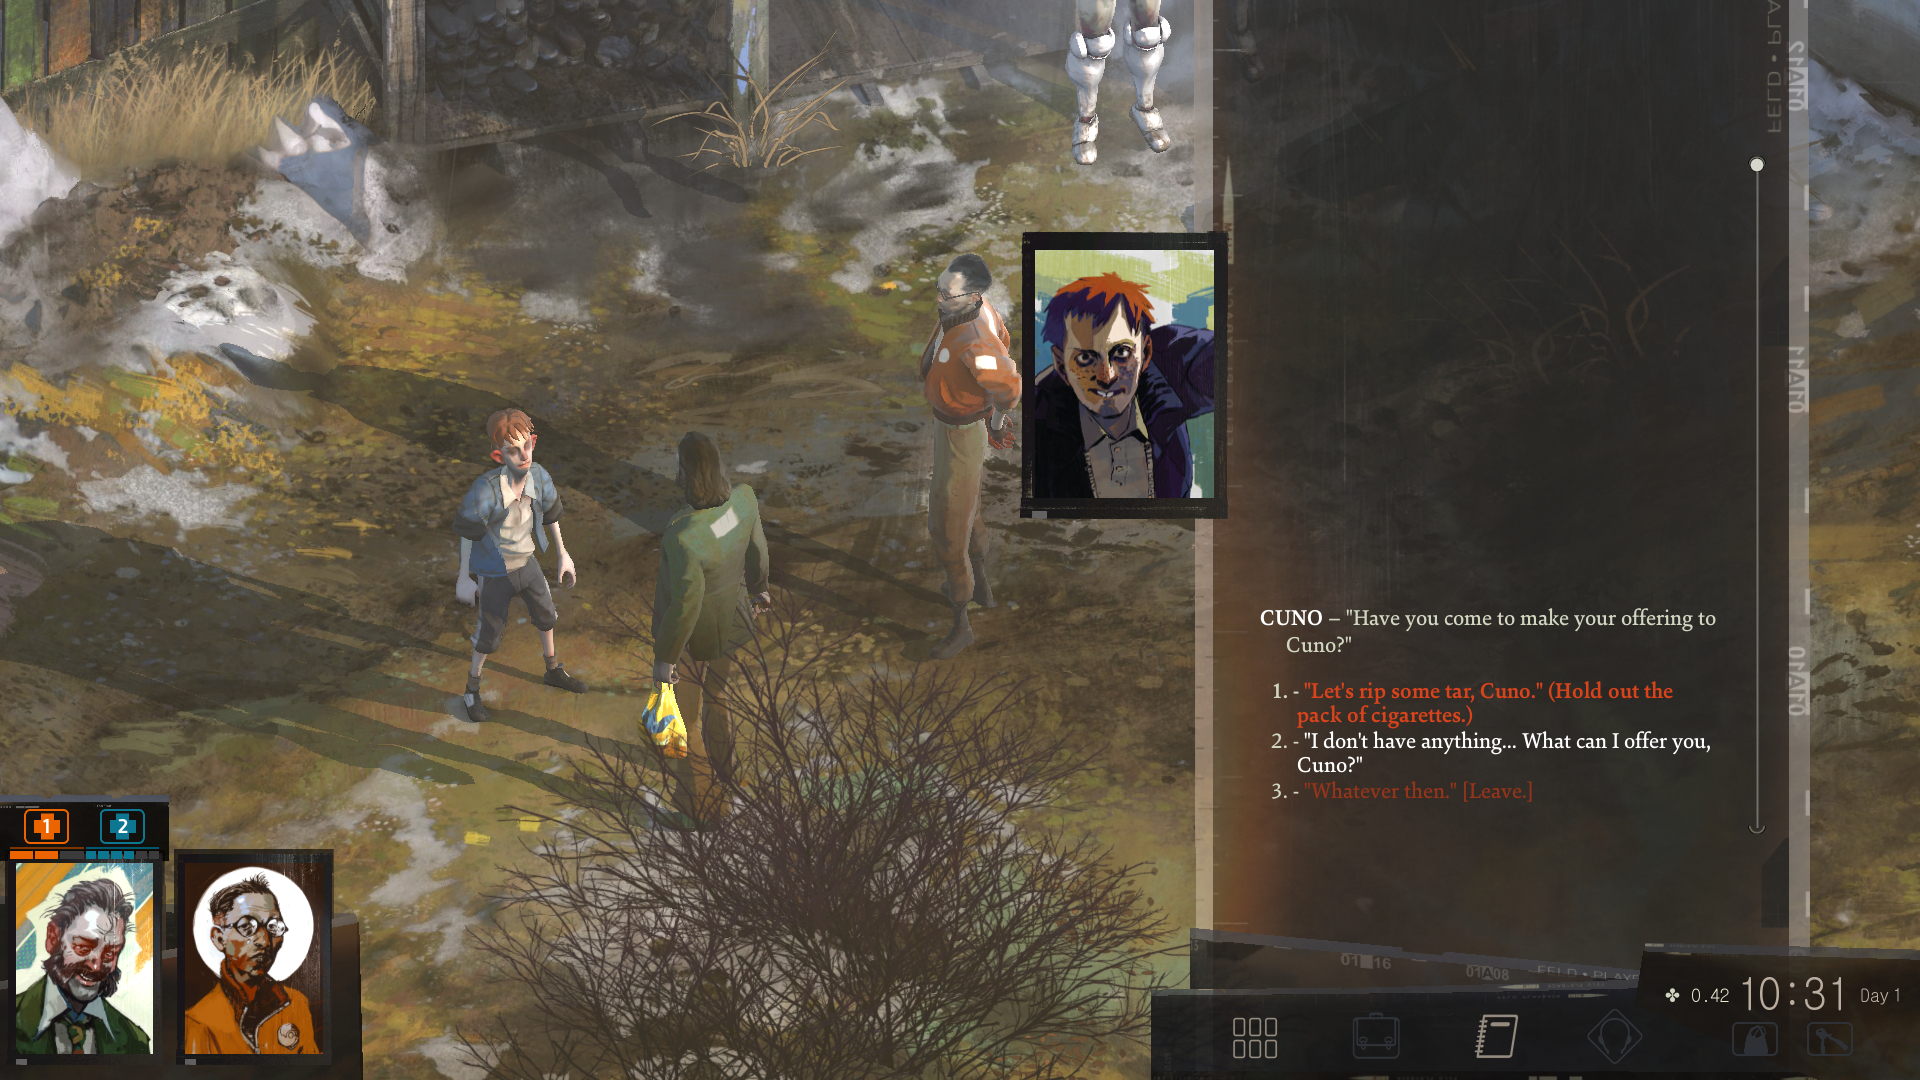 A screenshot from the video game, Disco Elysium. A group of three people stand around in an open field. Two men look towards a young, fair-skinned boy with a haggardly expression. A dialogue window sits on the left side of the screen, depicting a conversation between the group. The dialogue tree opens up with Cuno saying, "Have you come to make your offering to Cuno?" Dialogue options as follows are listed below the question, "Let's rip some tar, Cuno.", "I don't have anything...What can I offer you, Cuno?". and "Whatever then."